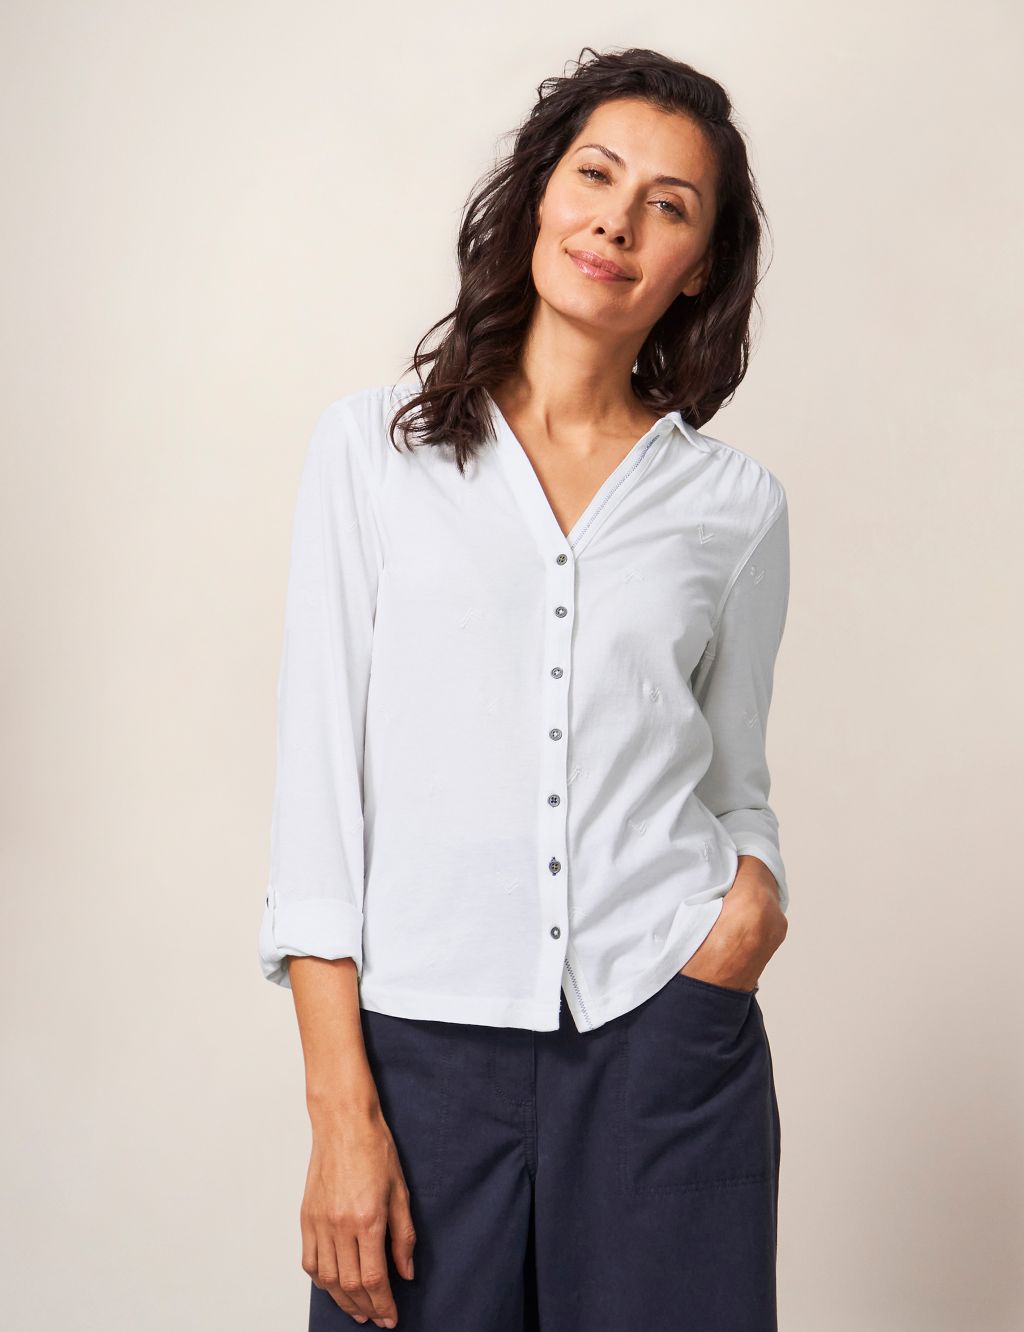 Organic Cotton Embroidered Collared Shirt image 3